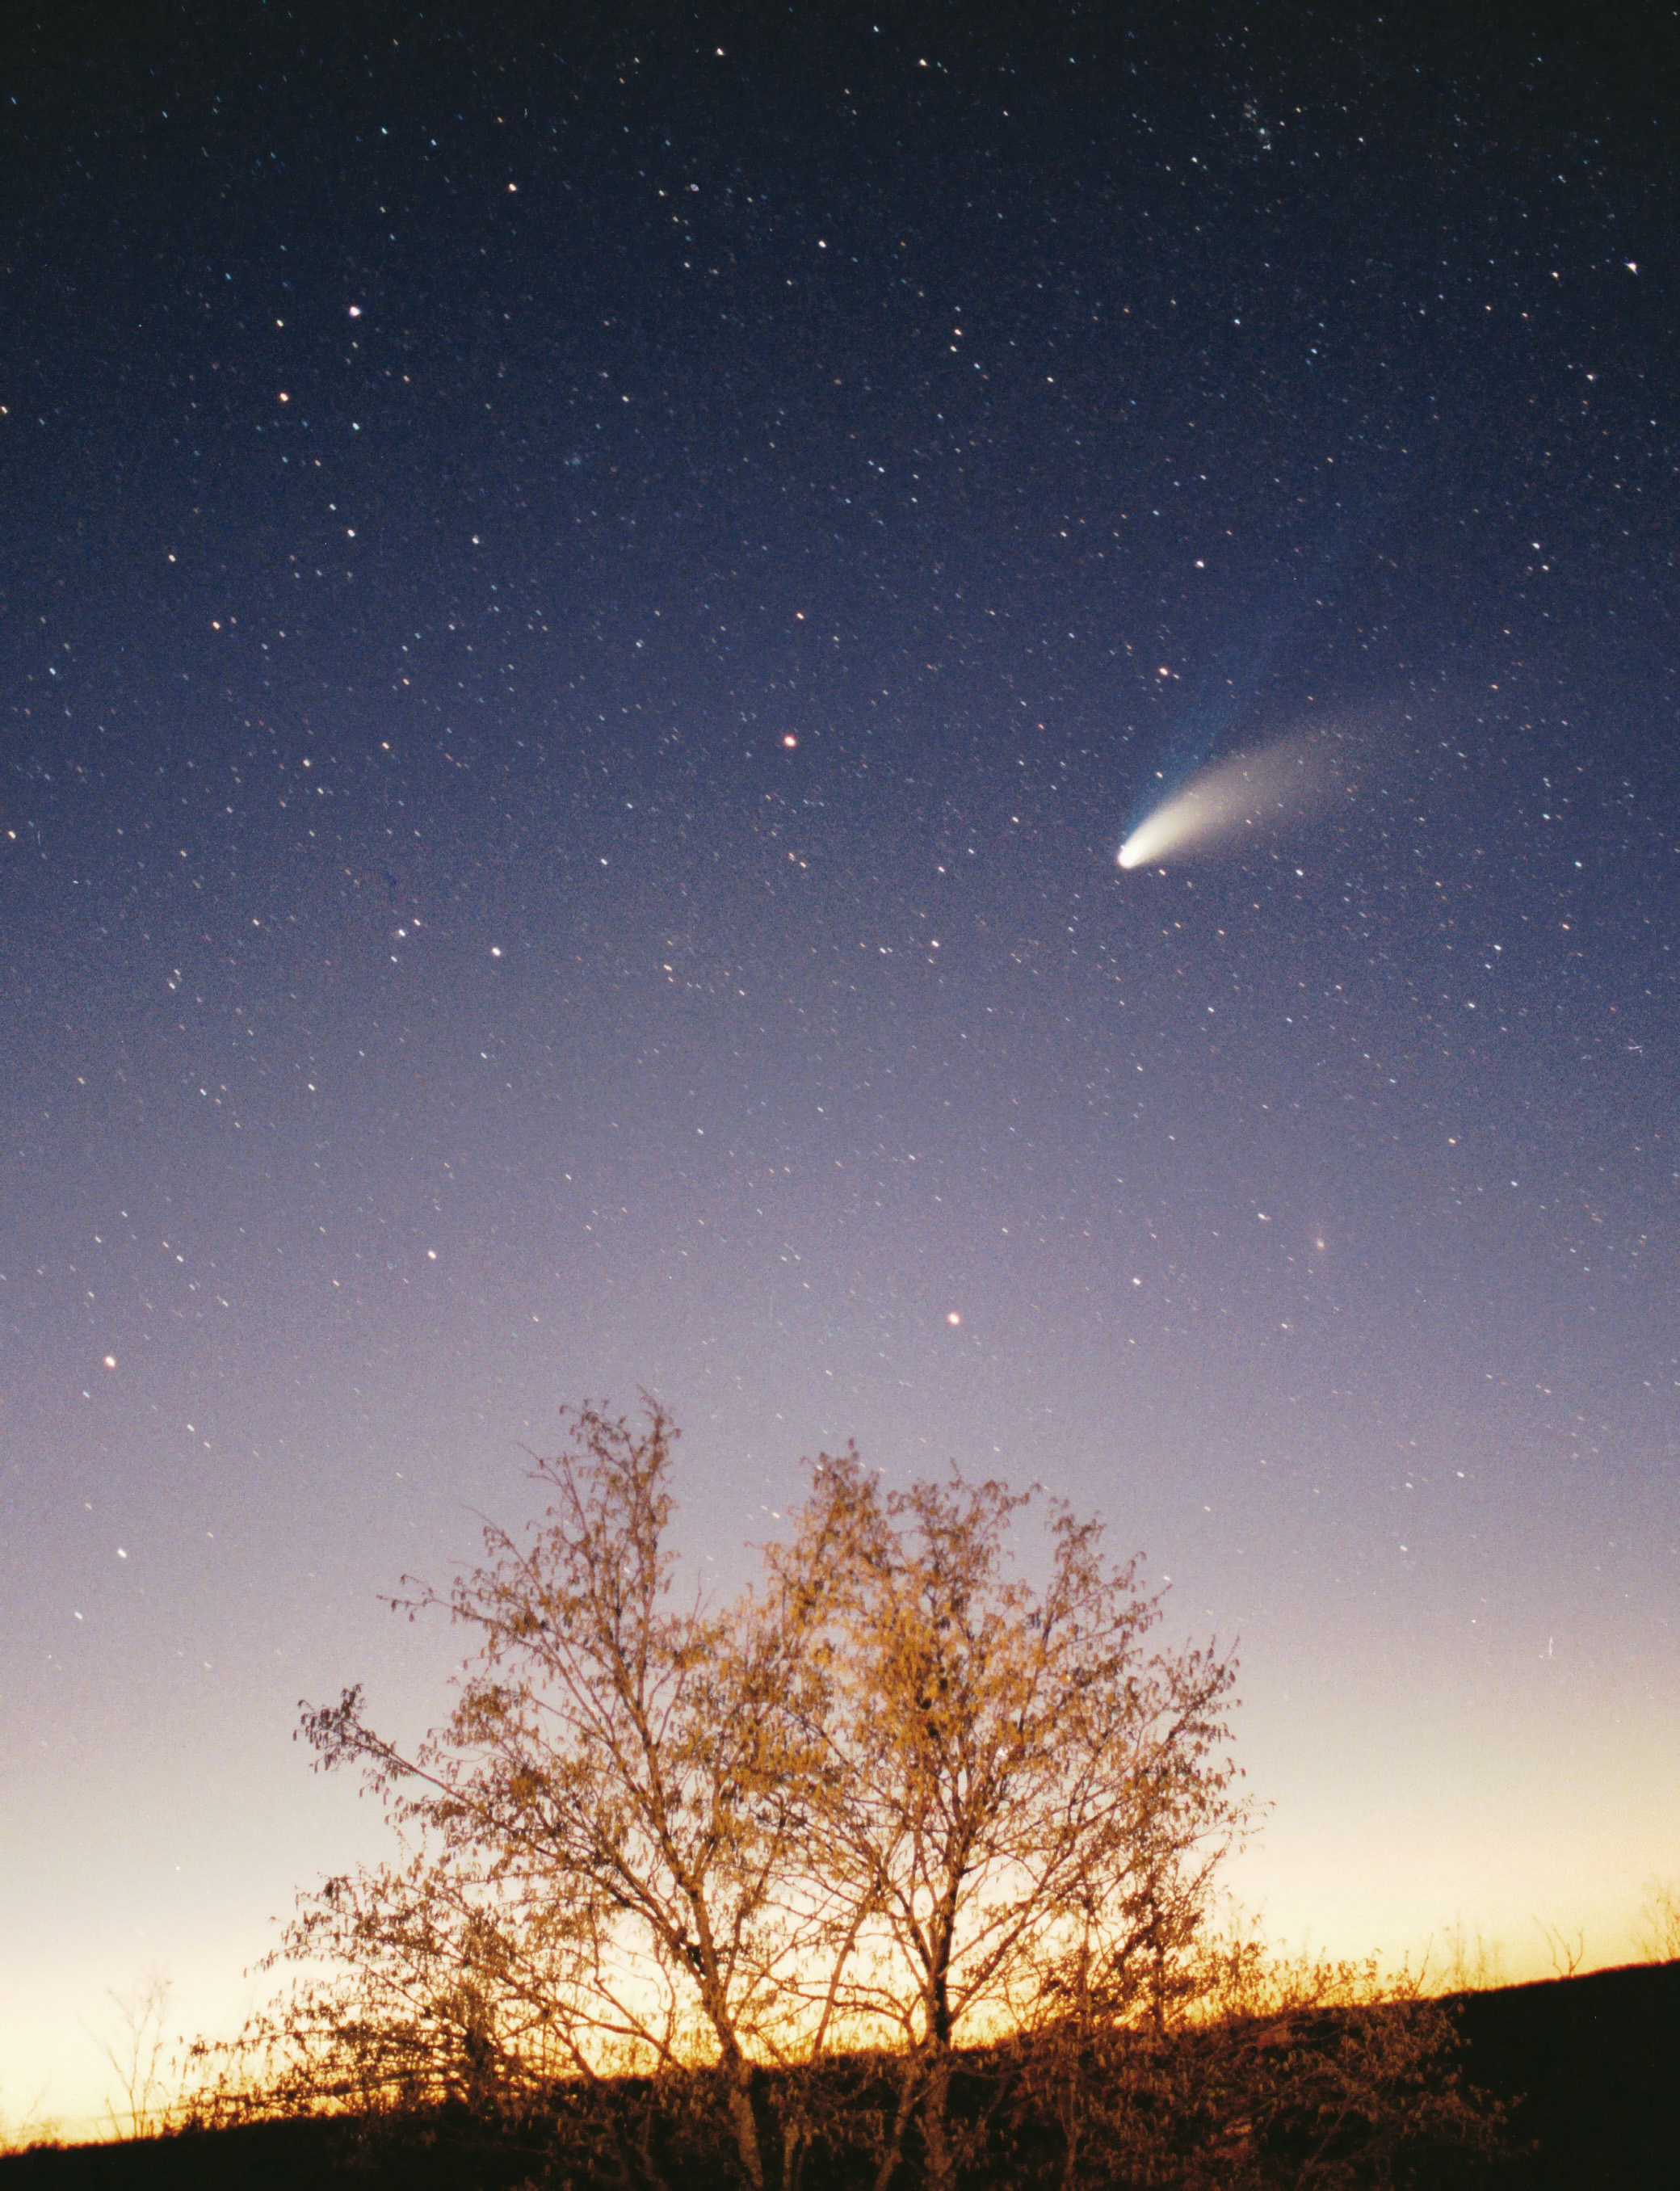 Photo - As comets, like Hale Bopp shown here, pass near the Sun, they release dust that can reach Earth's orbit and settle through the atmosphere where it can be collected. (Credit: Philipp Salzgeber/CC license)